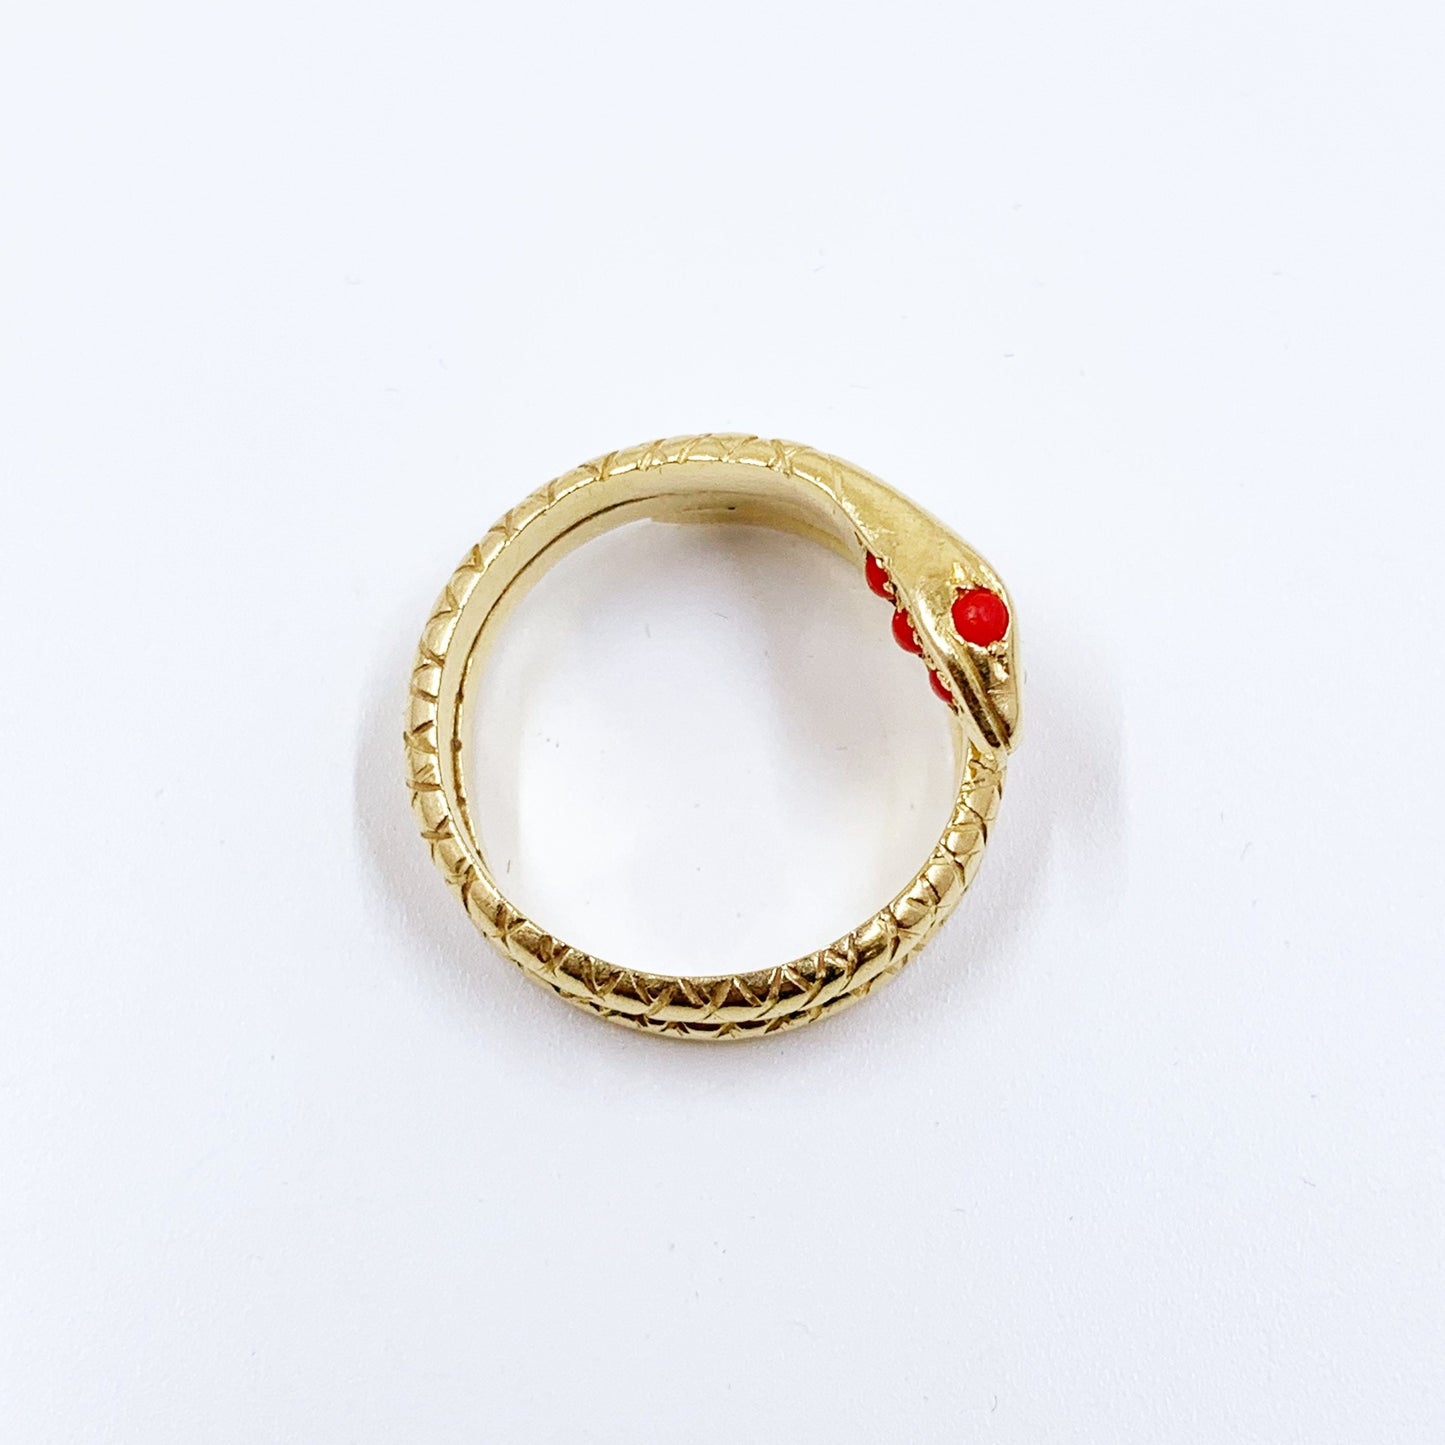 Vintage 14K Gold and Coral Coiled Snake Ring | Size 7 1/4